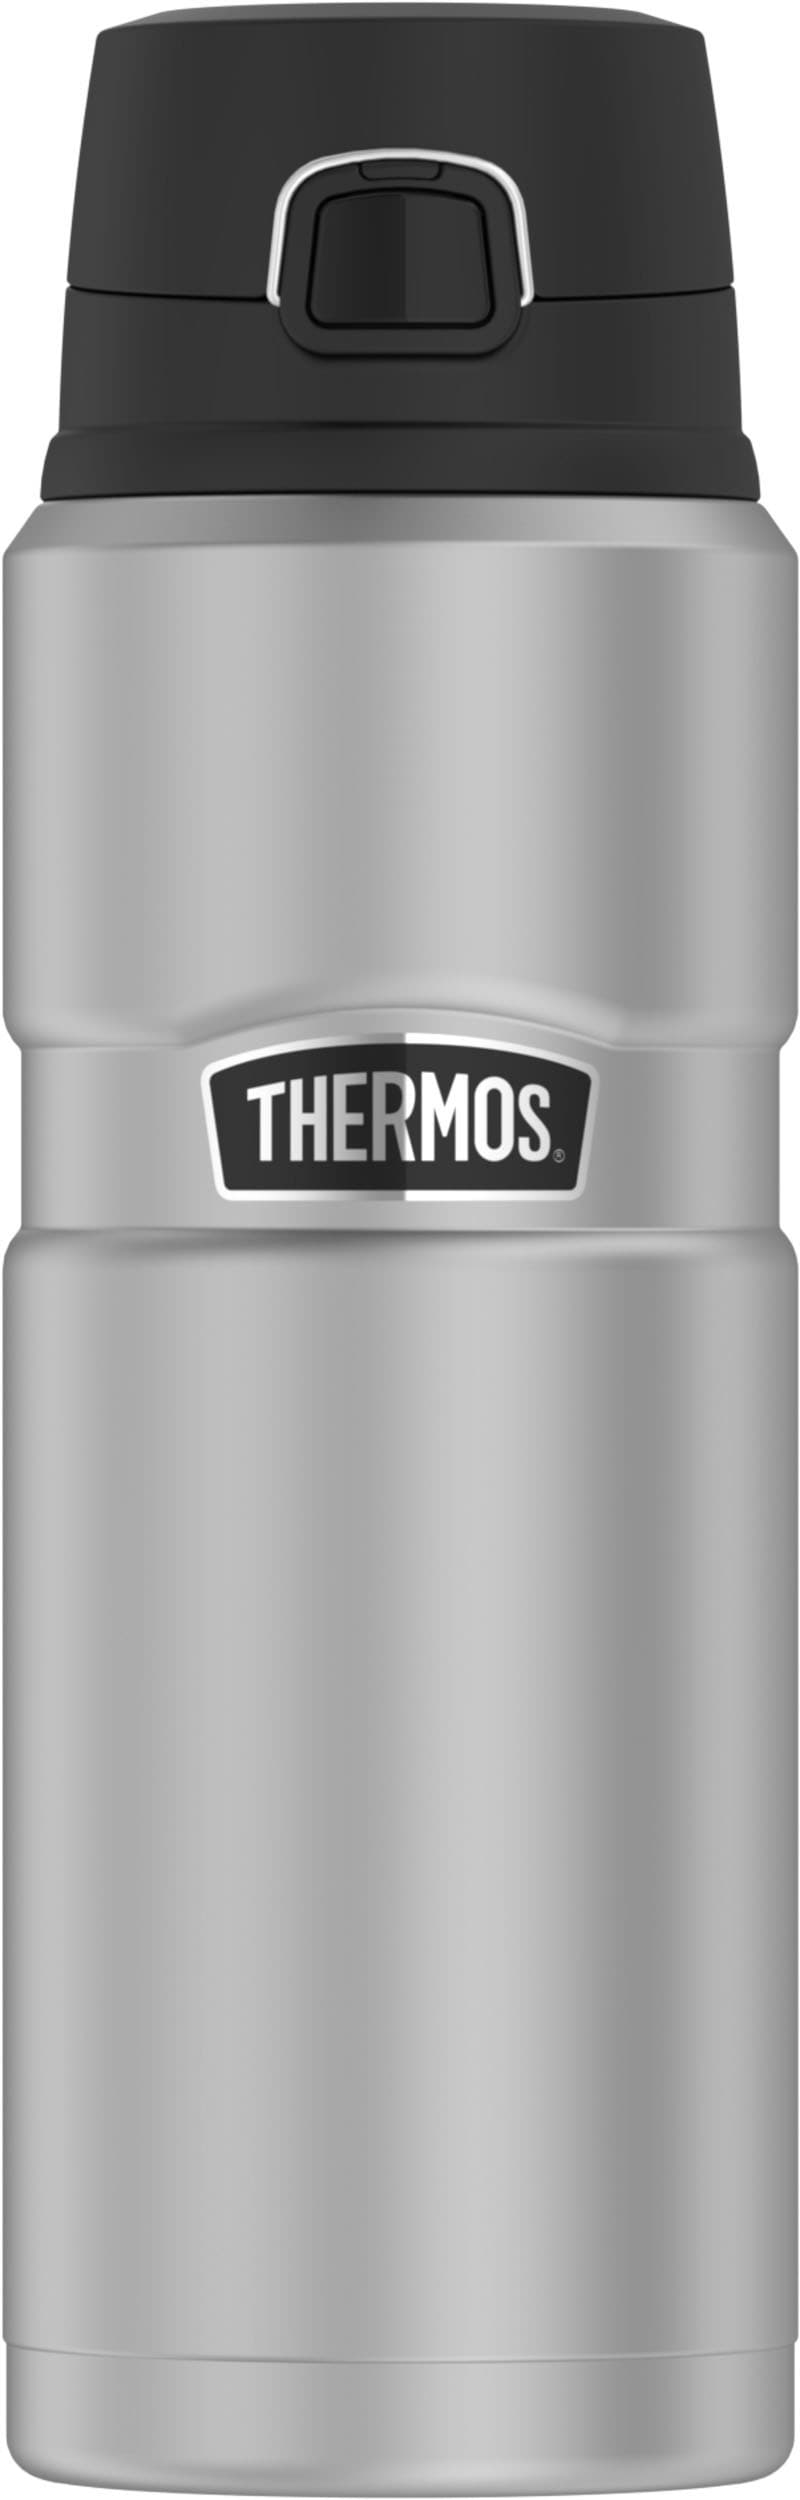 Thermoflasche »Stainless King«, Edelstahl, 0,7 Liter